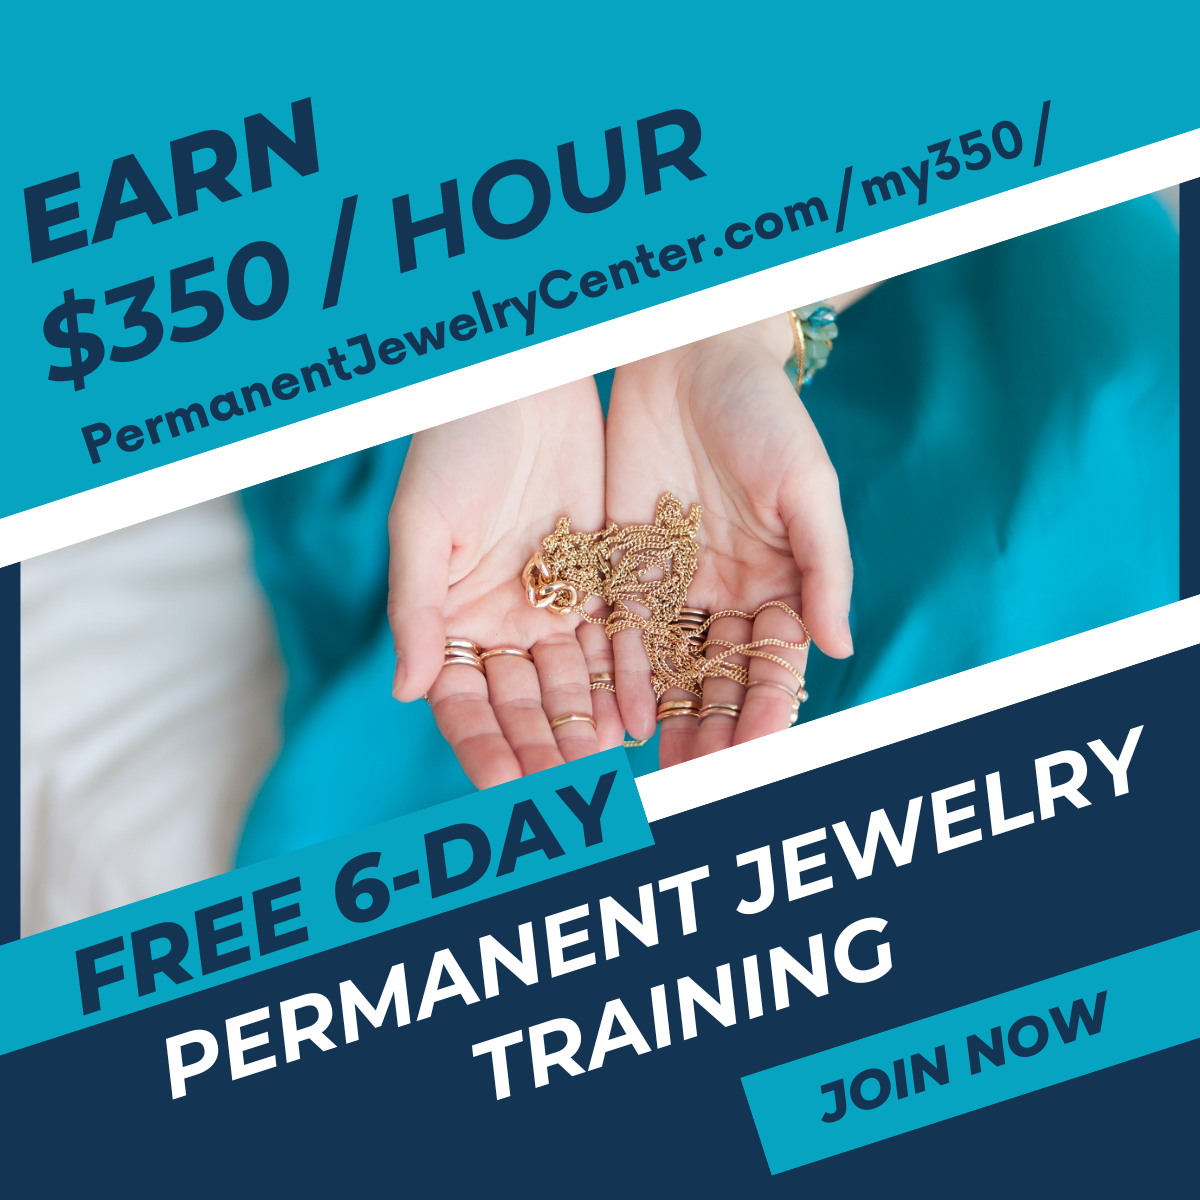 Why Invest in a Permanent Jewelry Starter Kit?